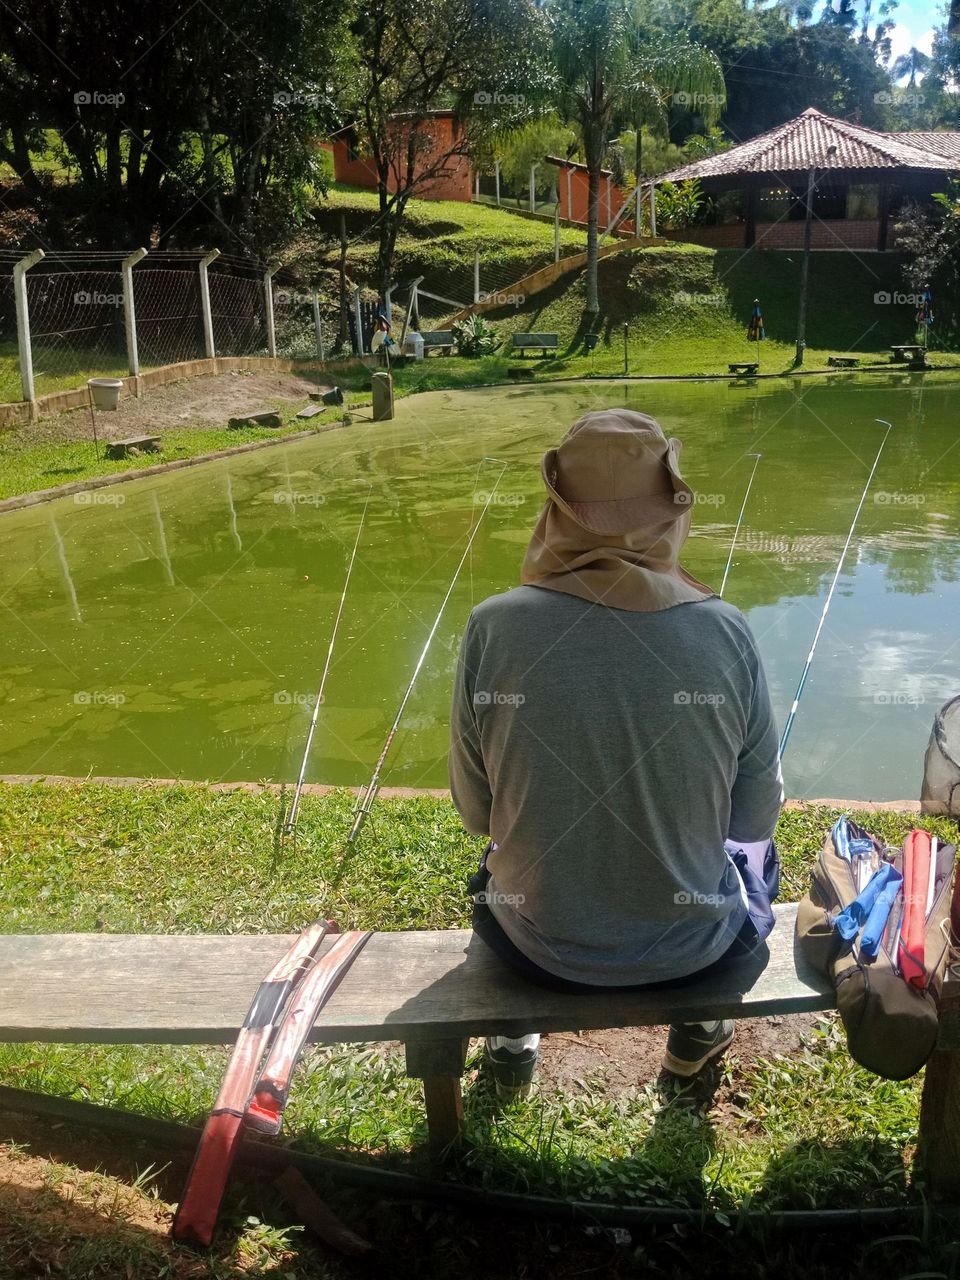 Fishing at a pond on a sunny day